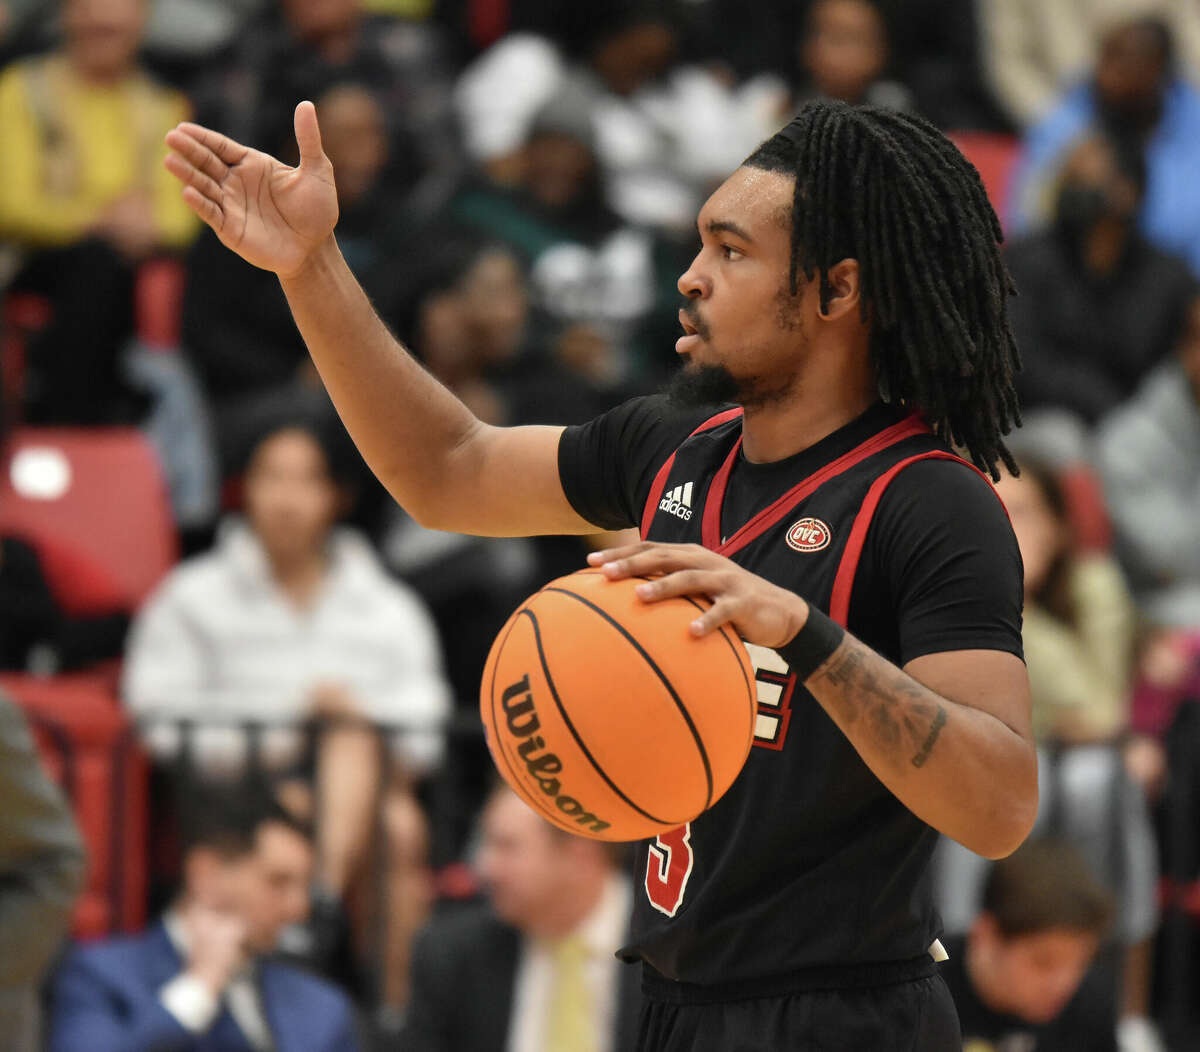 SIUE's Ray'Sean Taylor sets up the offense against Lindenwood during an Ohio Valley Conference game inside the First Community Arena in Edwardsville.